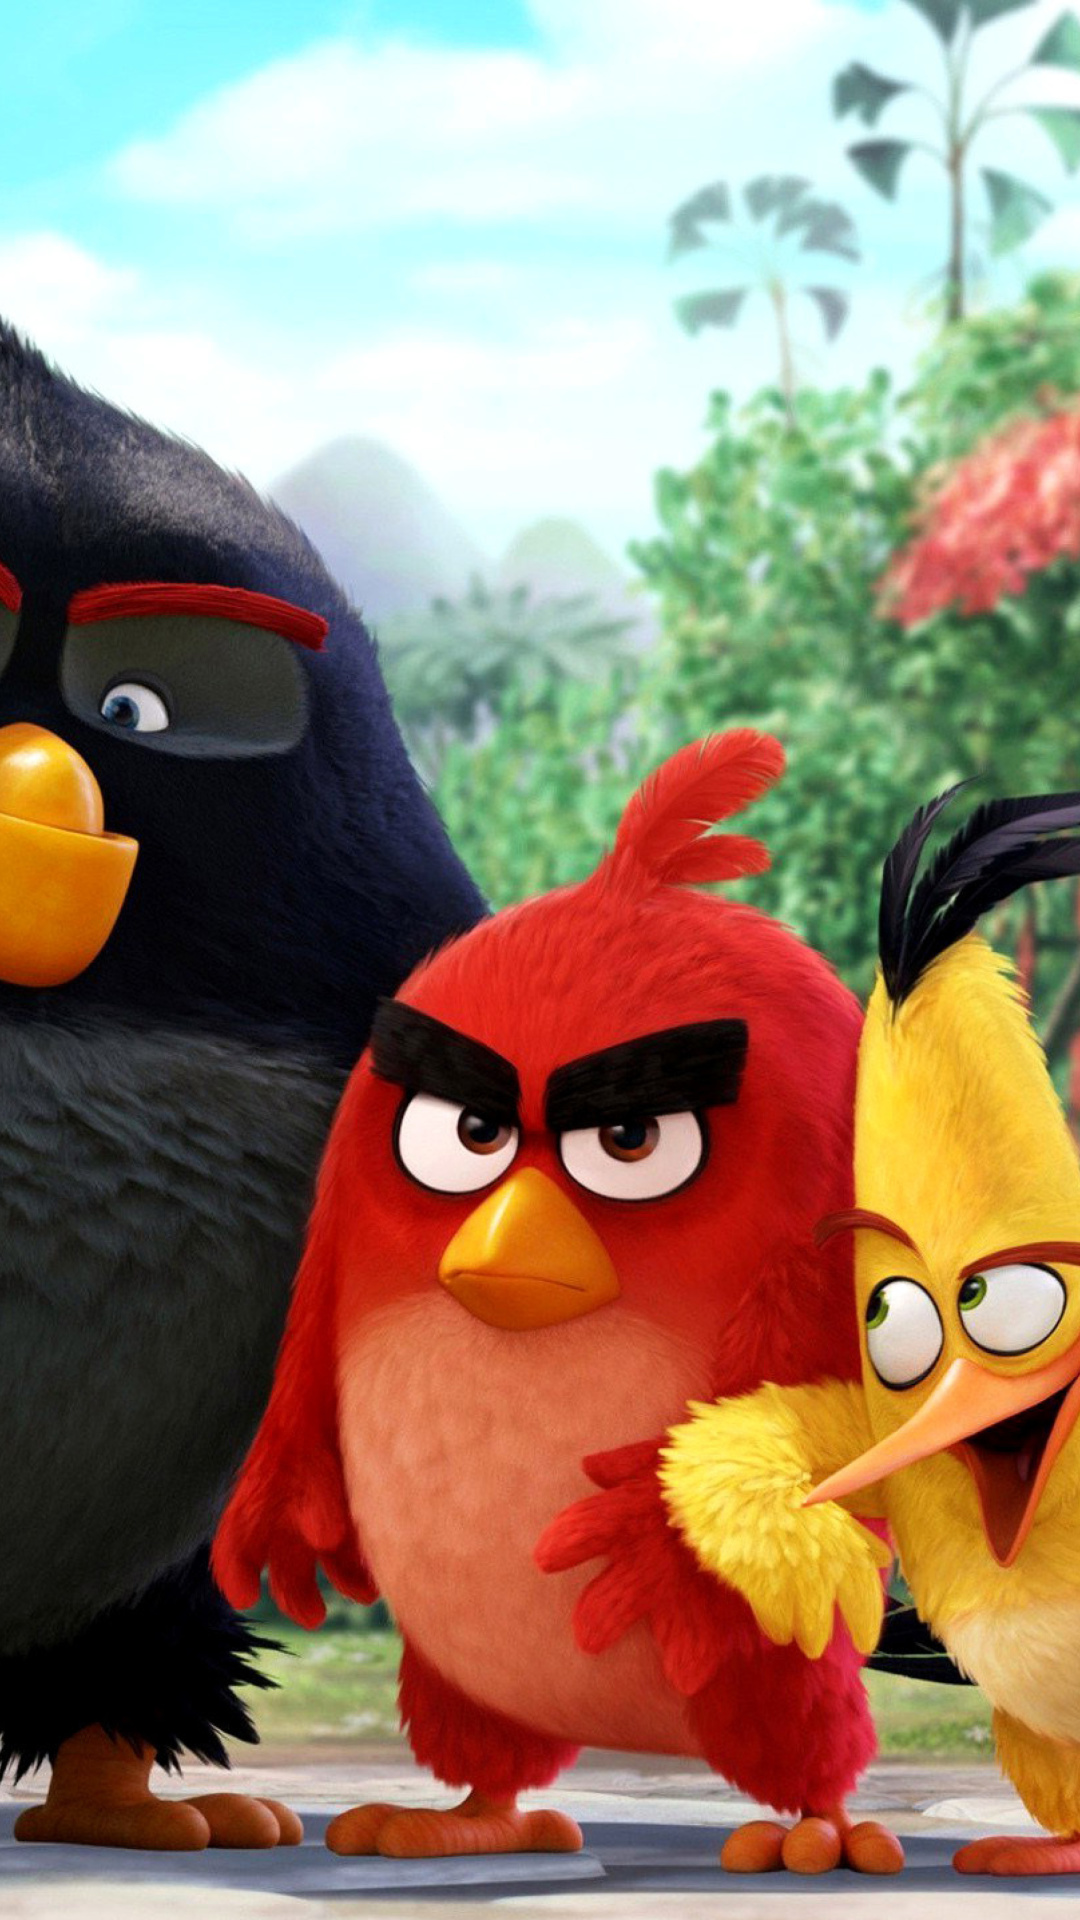 The Angry Birds Comedy Movie 2016 wallpaper 1080x1920